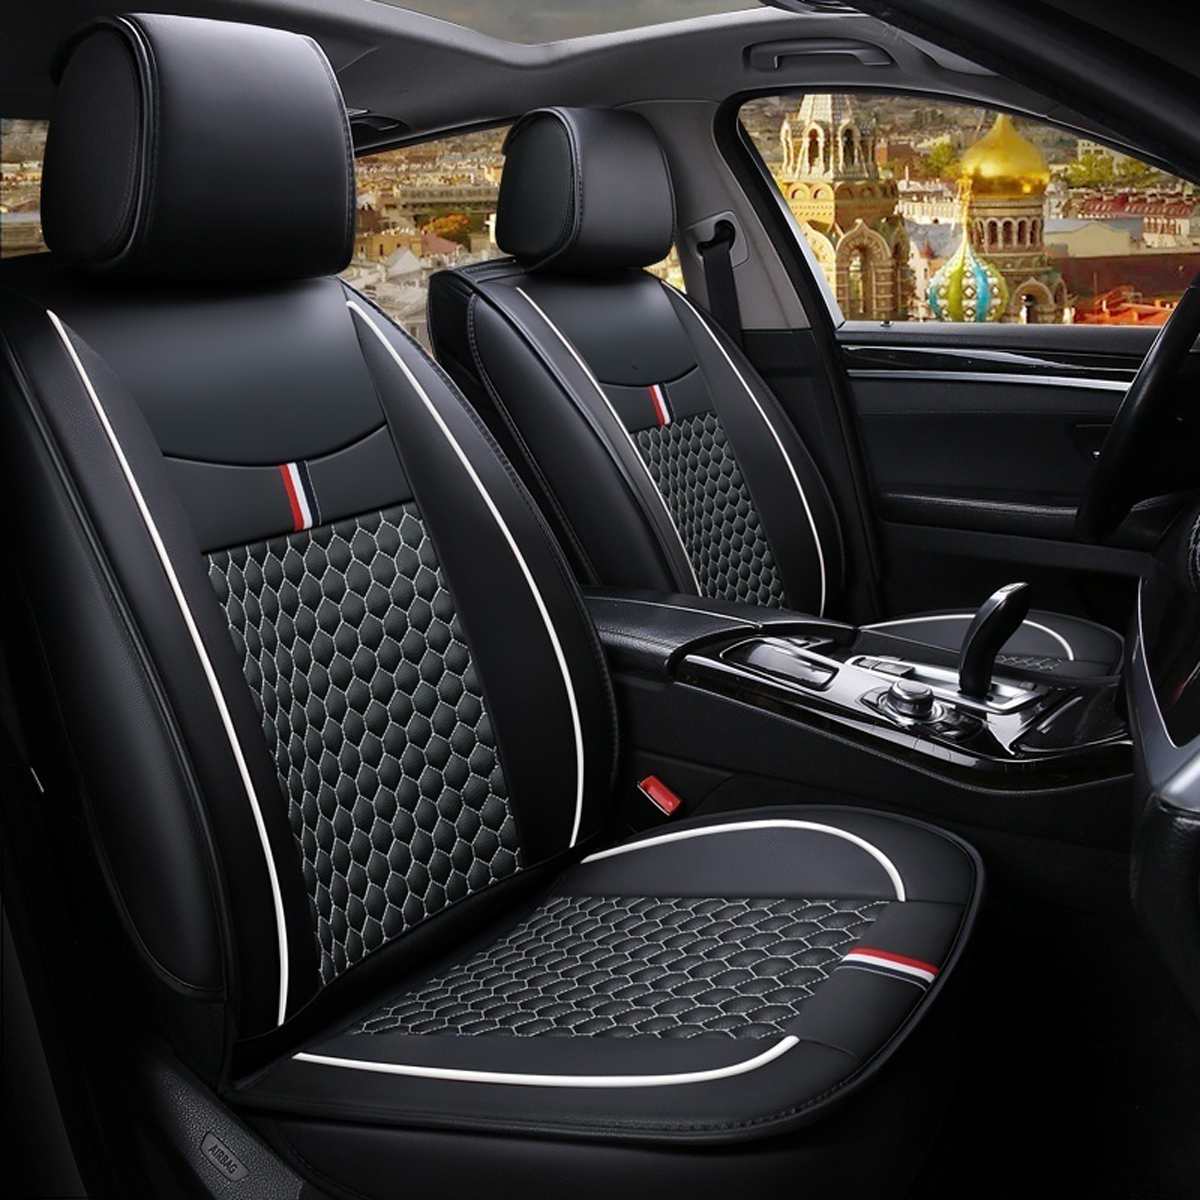 PU Leather Car Seat Cover 4 Color Auto Seat Cushion Interior Accessories Universal Front Seats Covers Protector Mat Car Styling